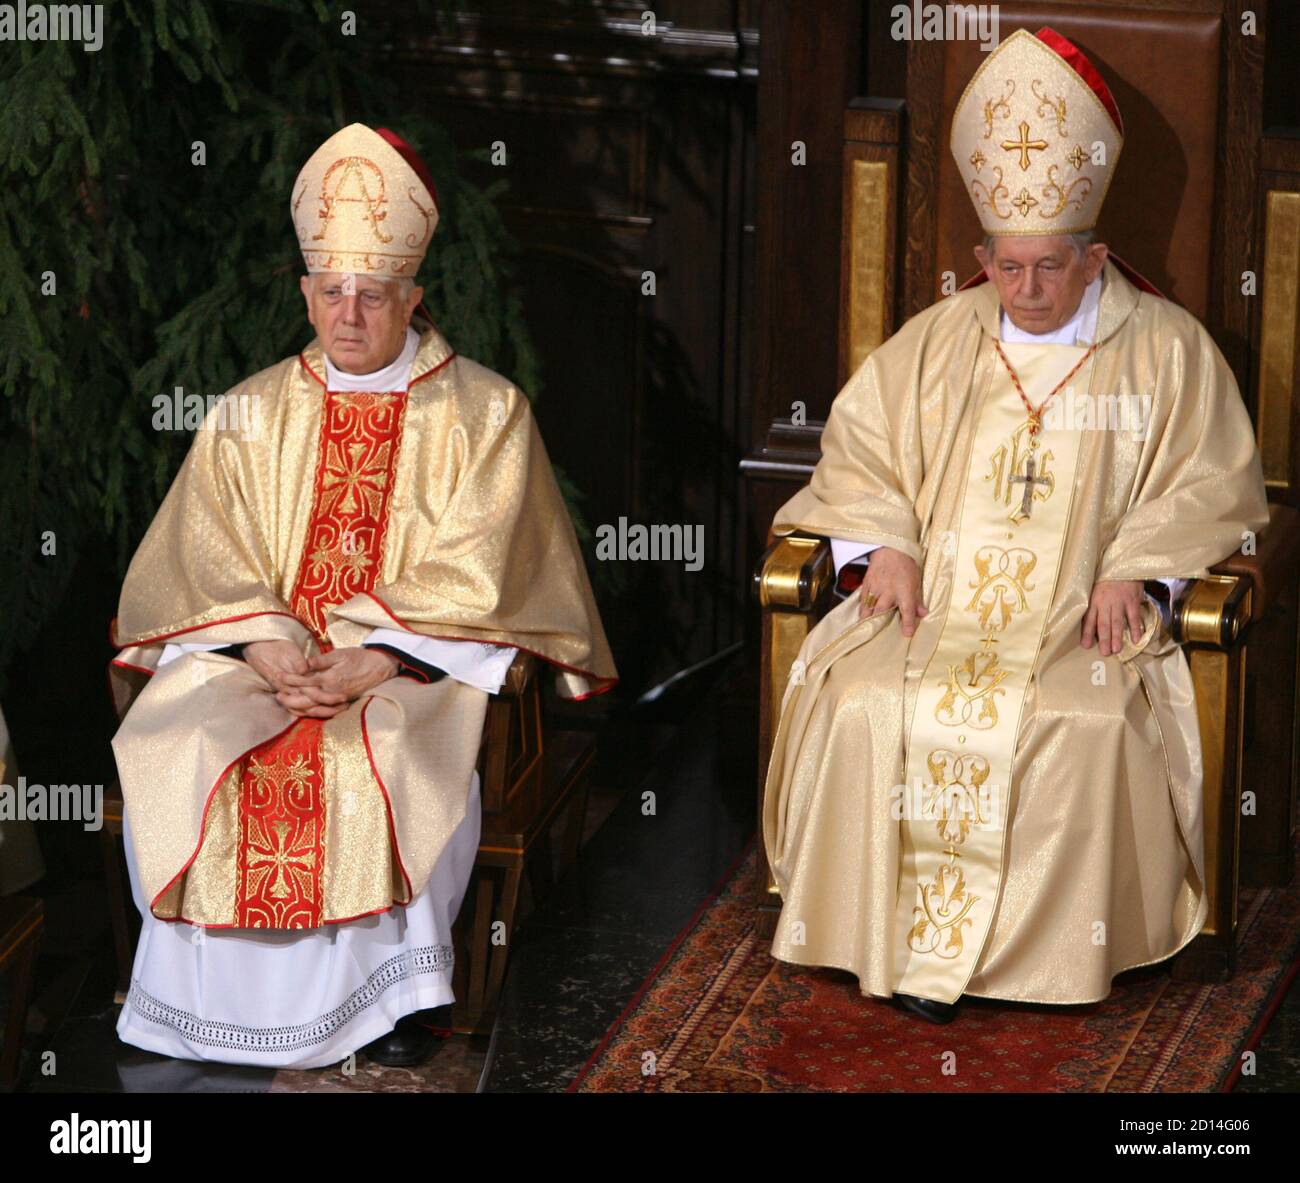 Stanislaw Wielgus (L) and Cardinal Jozef Glemp attend a Holy Mass at the Warsaw Cathedral January 7, 2007. Wielgus, the newly-appointed archbishop of Warsaw, resigned on Sunday after admitting he had spied for Poland's communist-era secret services, the Vatican's mission in Poland said.  REUTERS/Peter Andrews (POLAND) Stock Photo